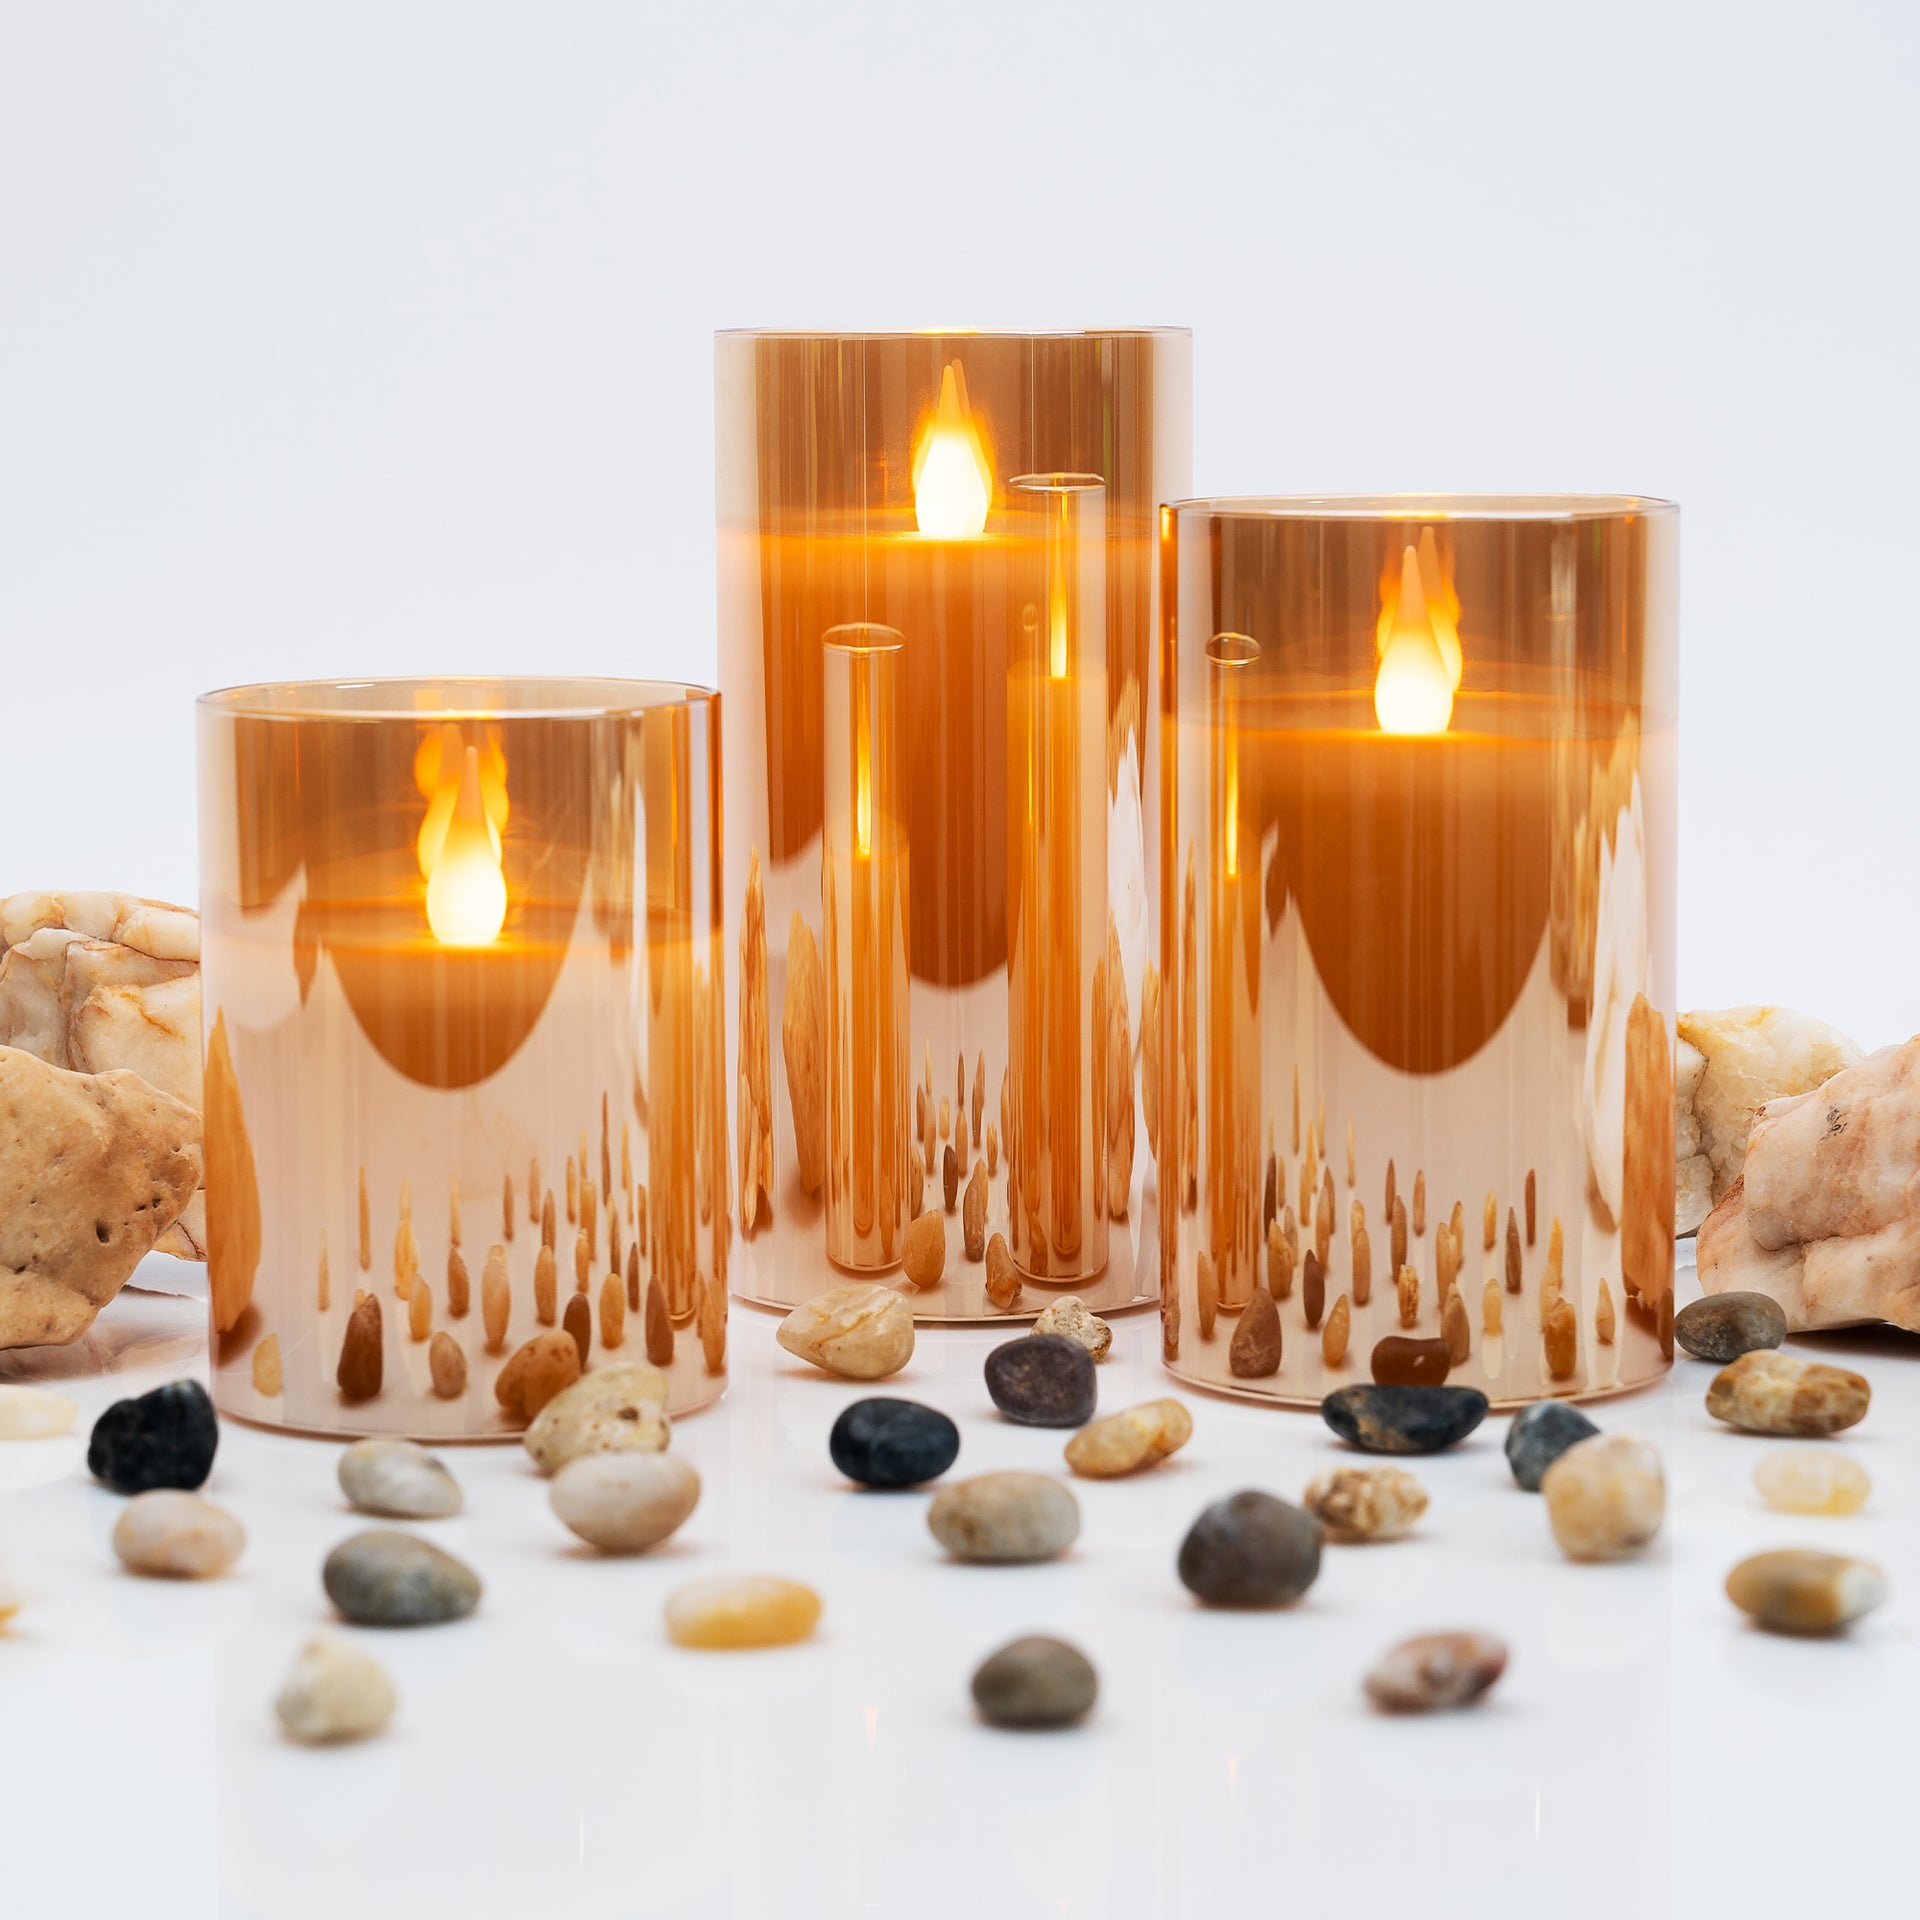 LED GOLD METALLIC MIRRORED TINTED GOLD GLASS FLICKERING DIMMABLE FLAMELESS CANDLES - SET OF 3 WITH REMOTE CONTROL - West Ivory LED Lighting 